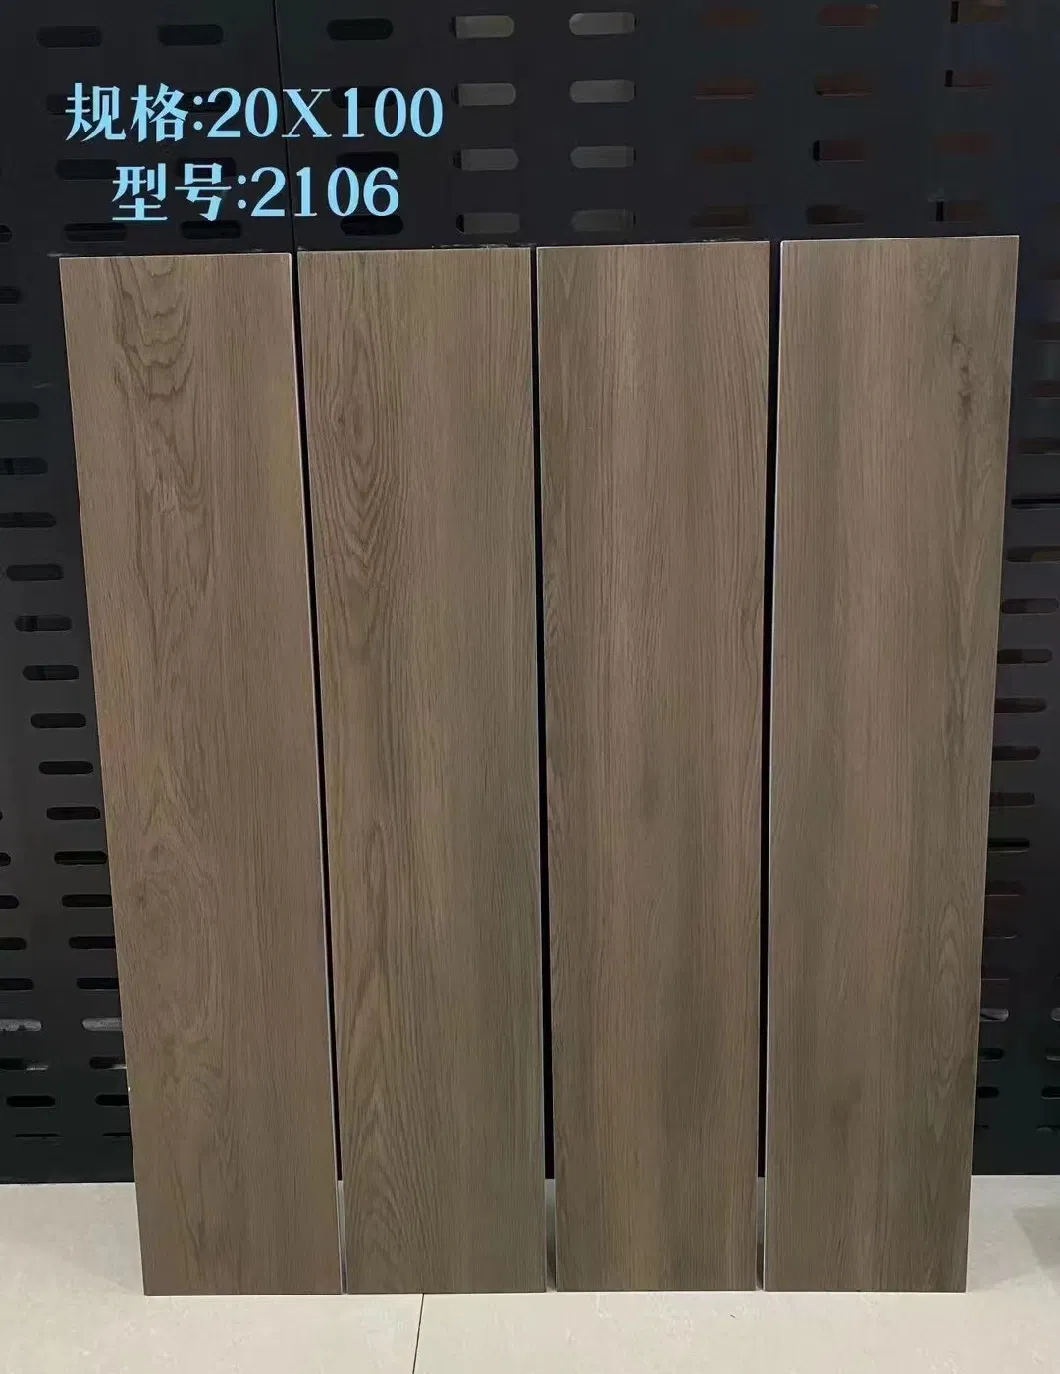 Top Quality Wooden Plank Floor &amp; Wall Tile 200X1000 mm Natural Looking Ceramic Wood Finish Tile New Texture Wall and Floor Tiles